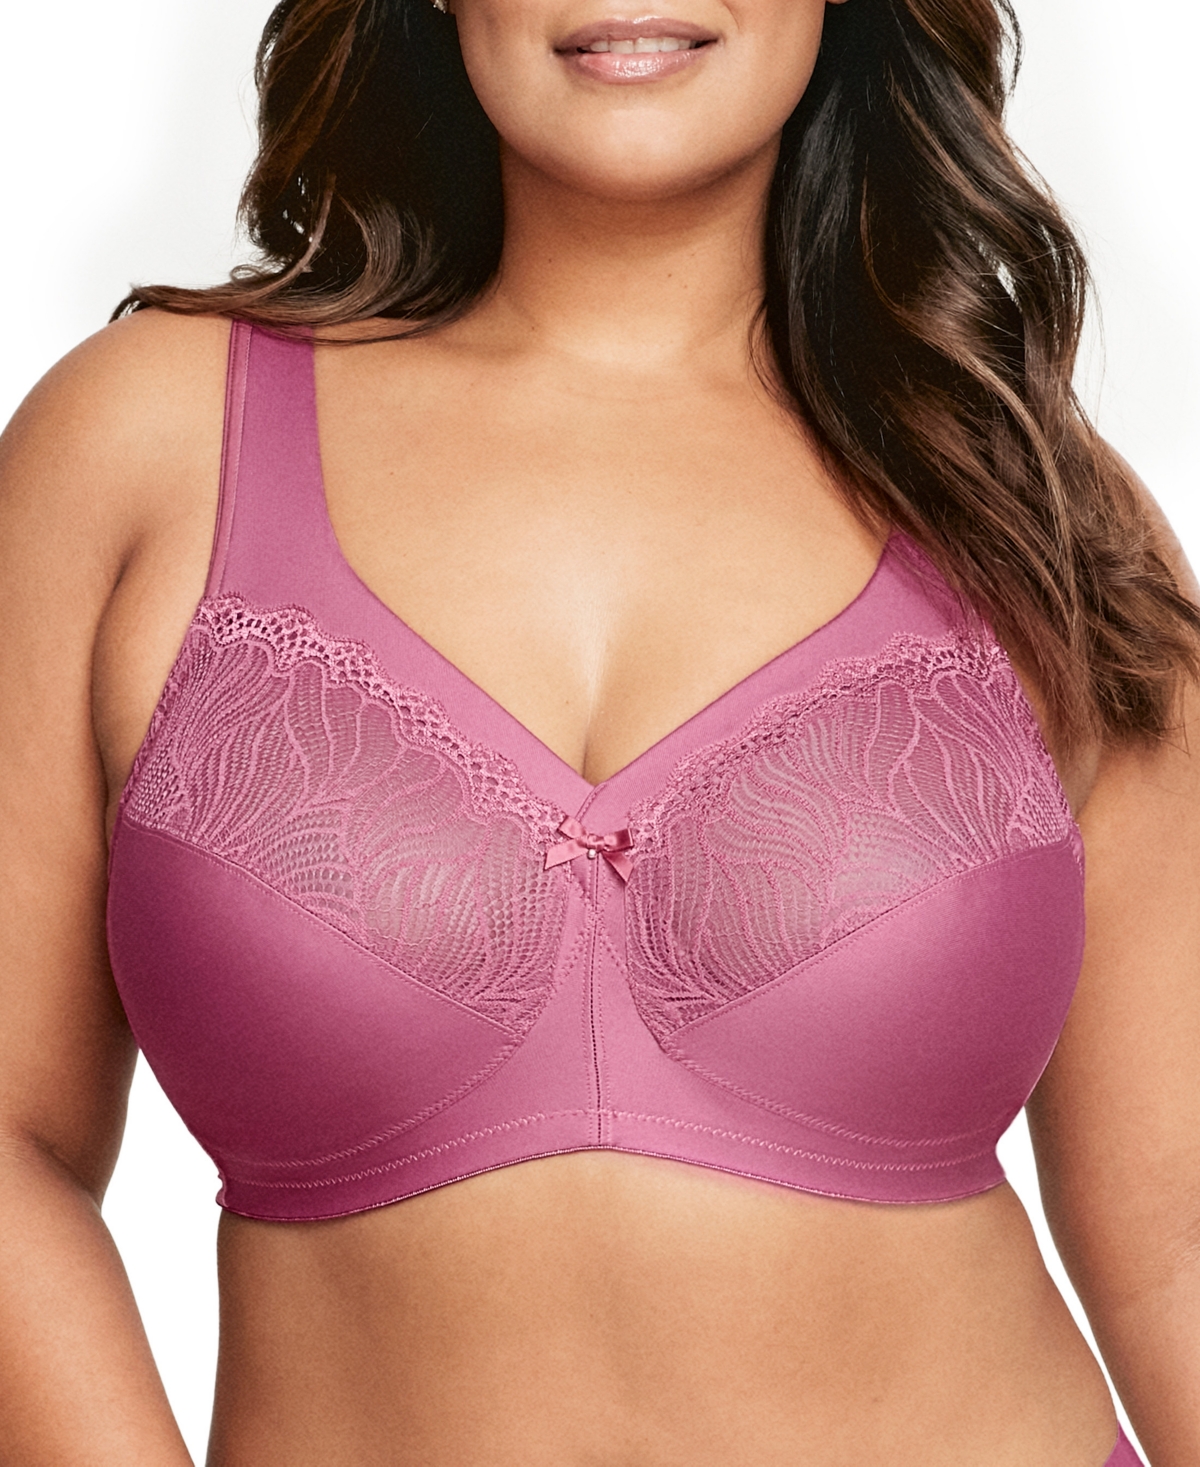 Plus Size Full Figure Magiclift Natural Shape Support Wireless Bra - Red Violet